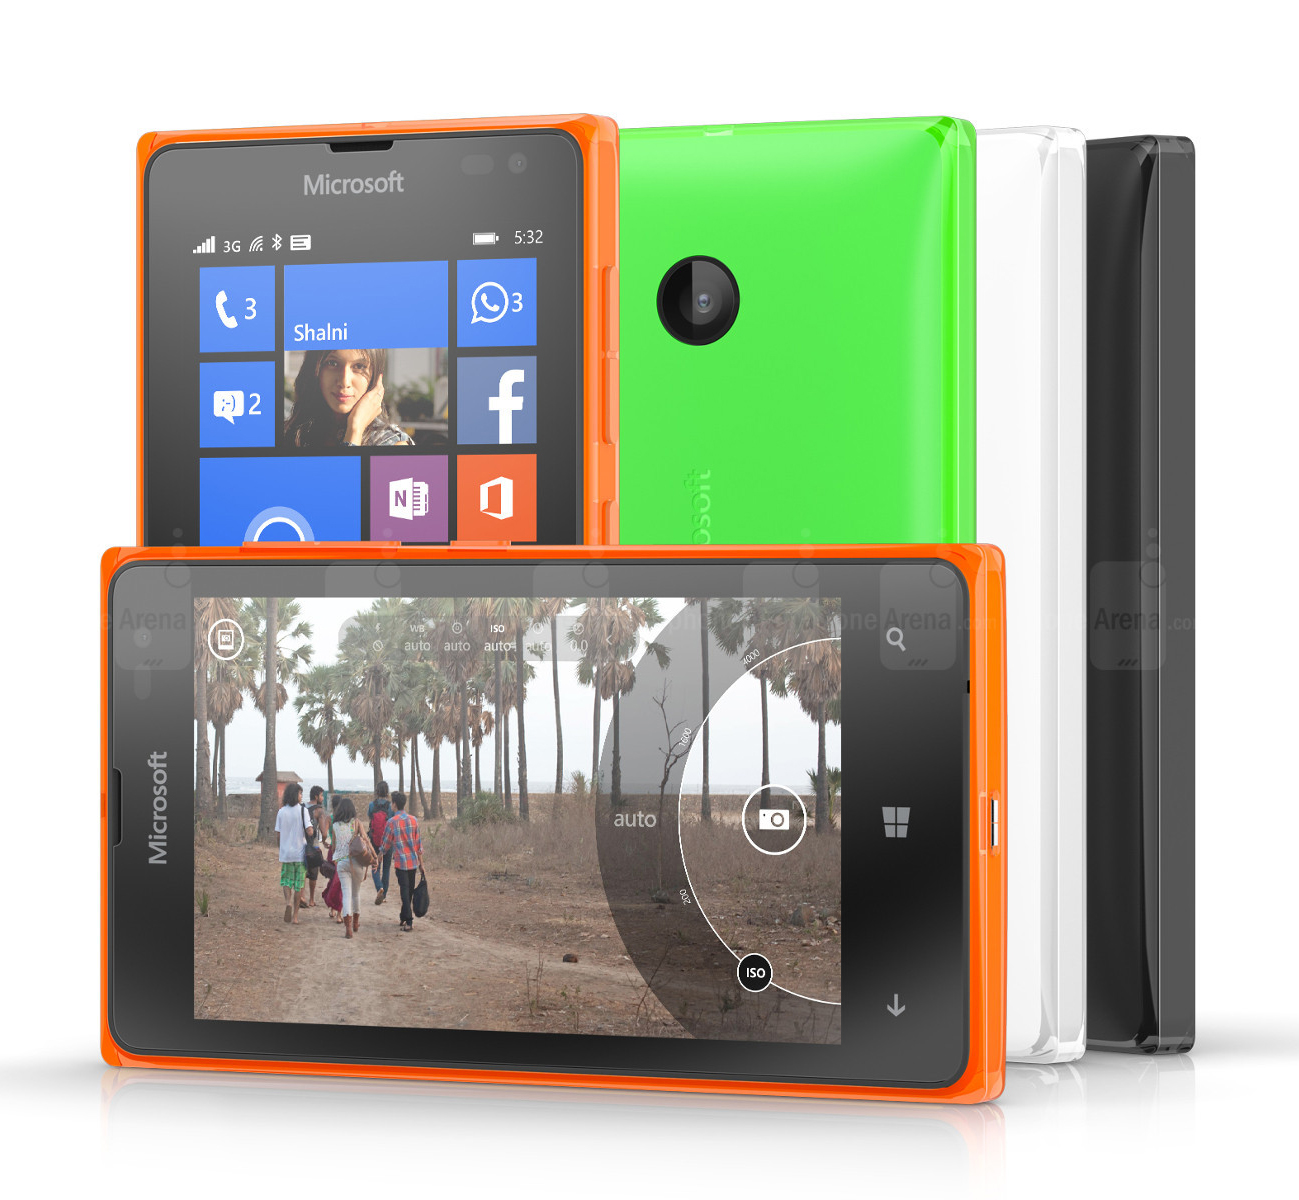 Microsoft Lumia 532 Window 10, Review, Specifications, Price and Release